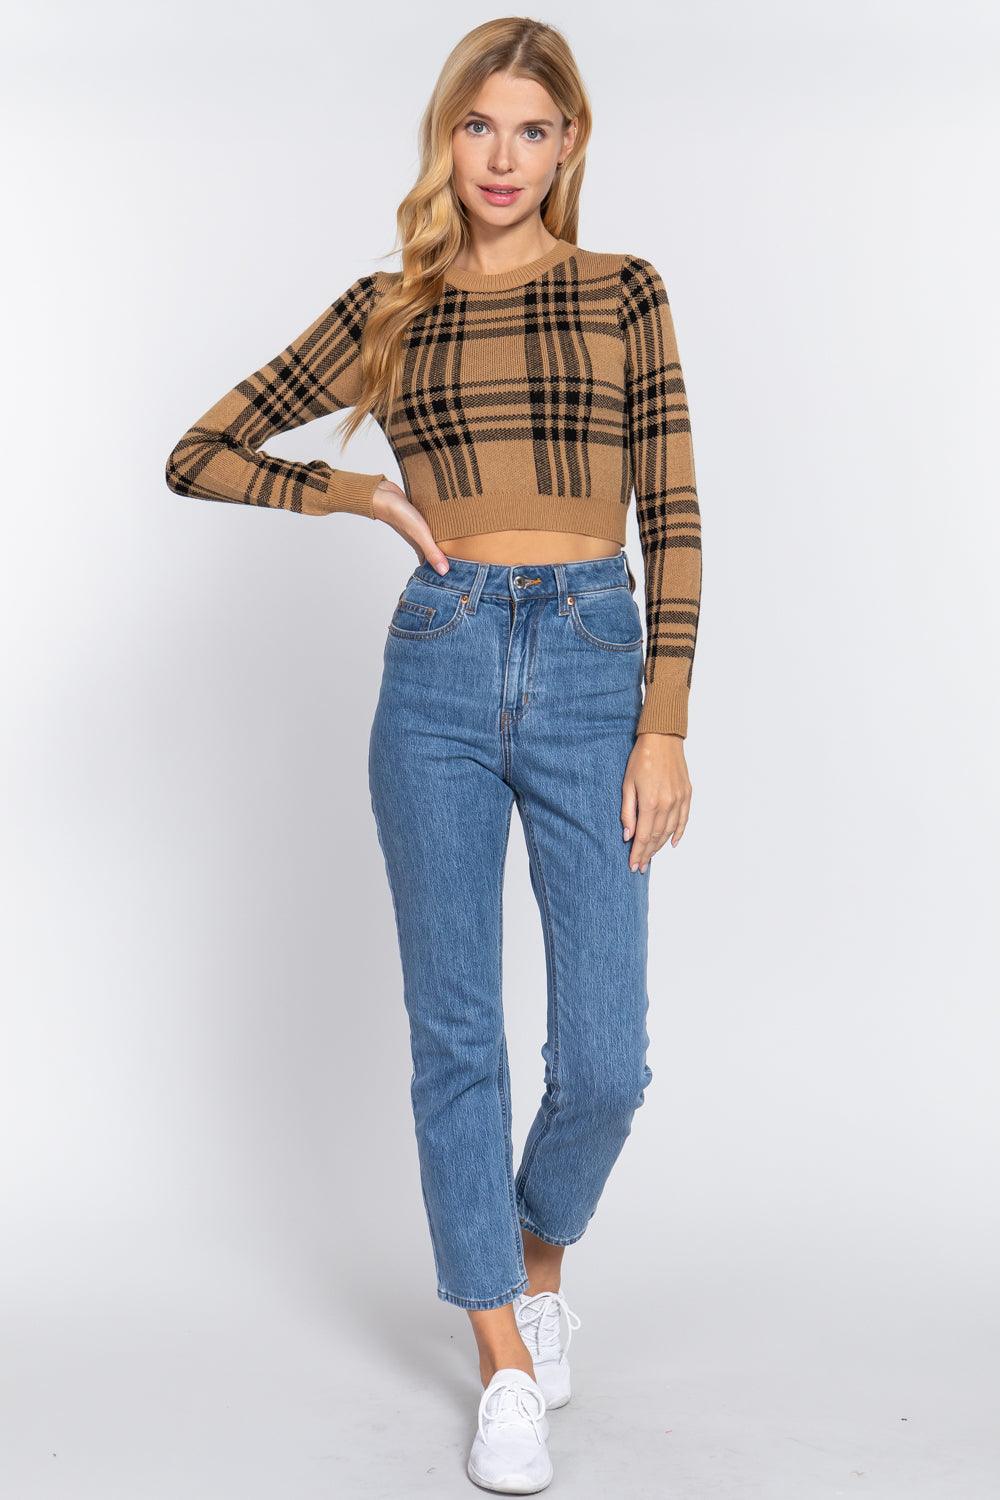 Long Slv Check Crop Sweater Naughty Smile Fashion